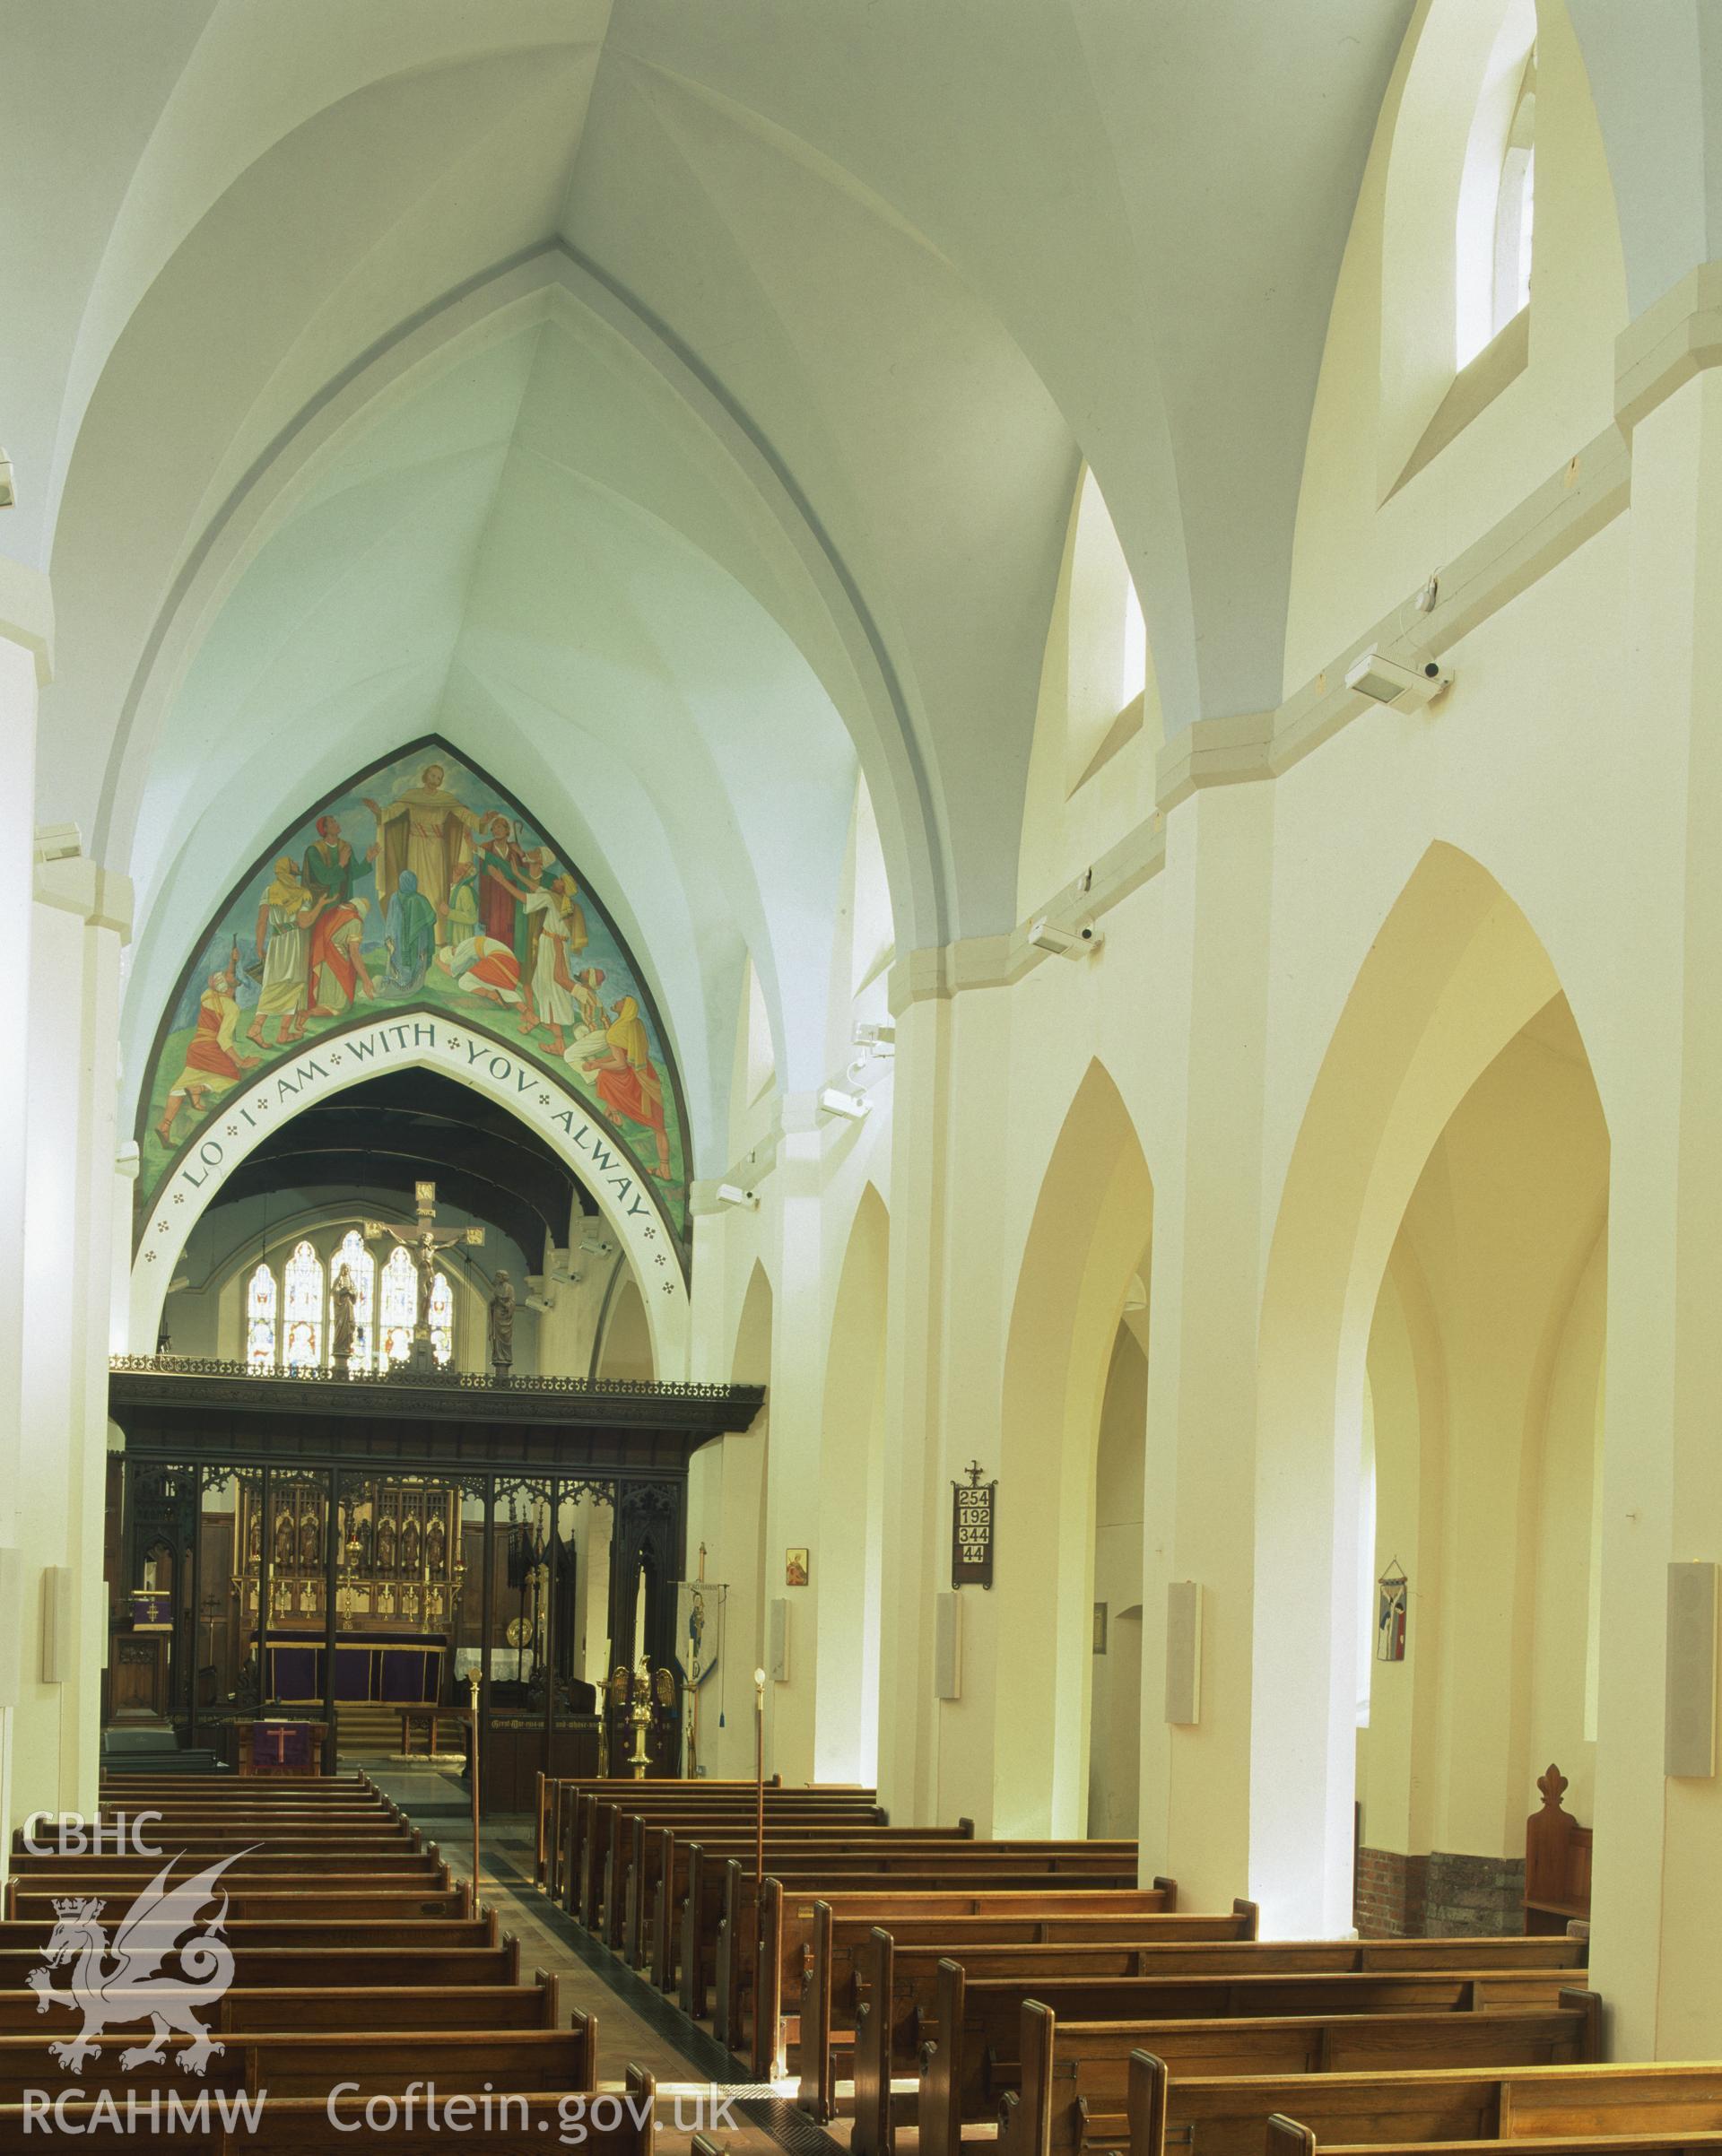 RCAHMW colour transparency showing interior view of St Katherines Church, Milford Haven.